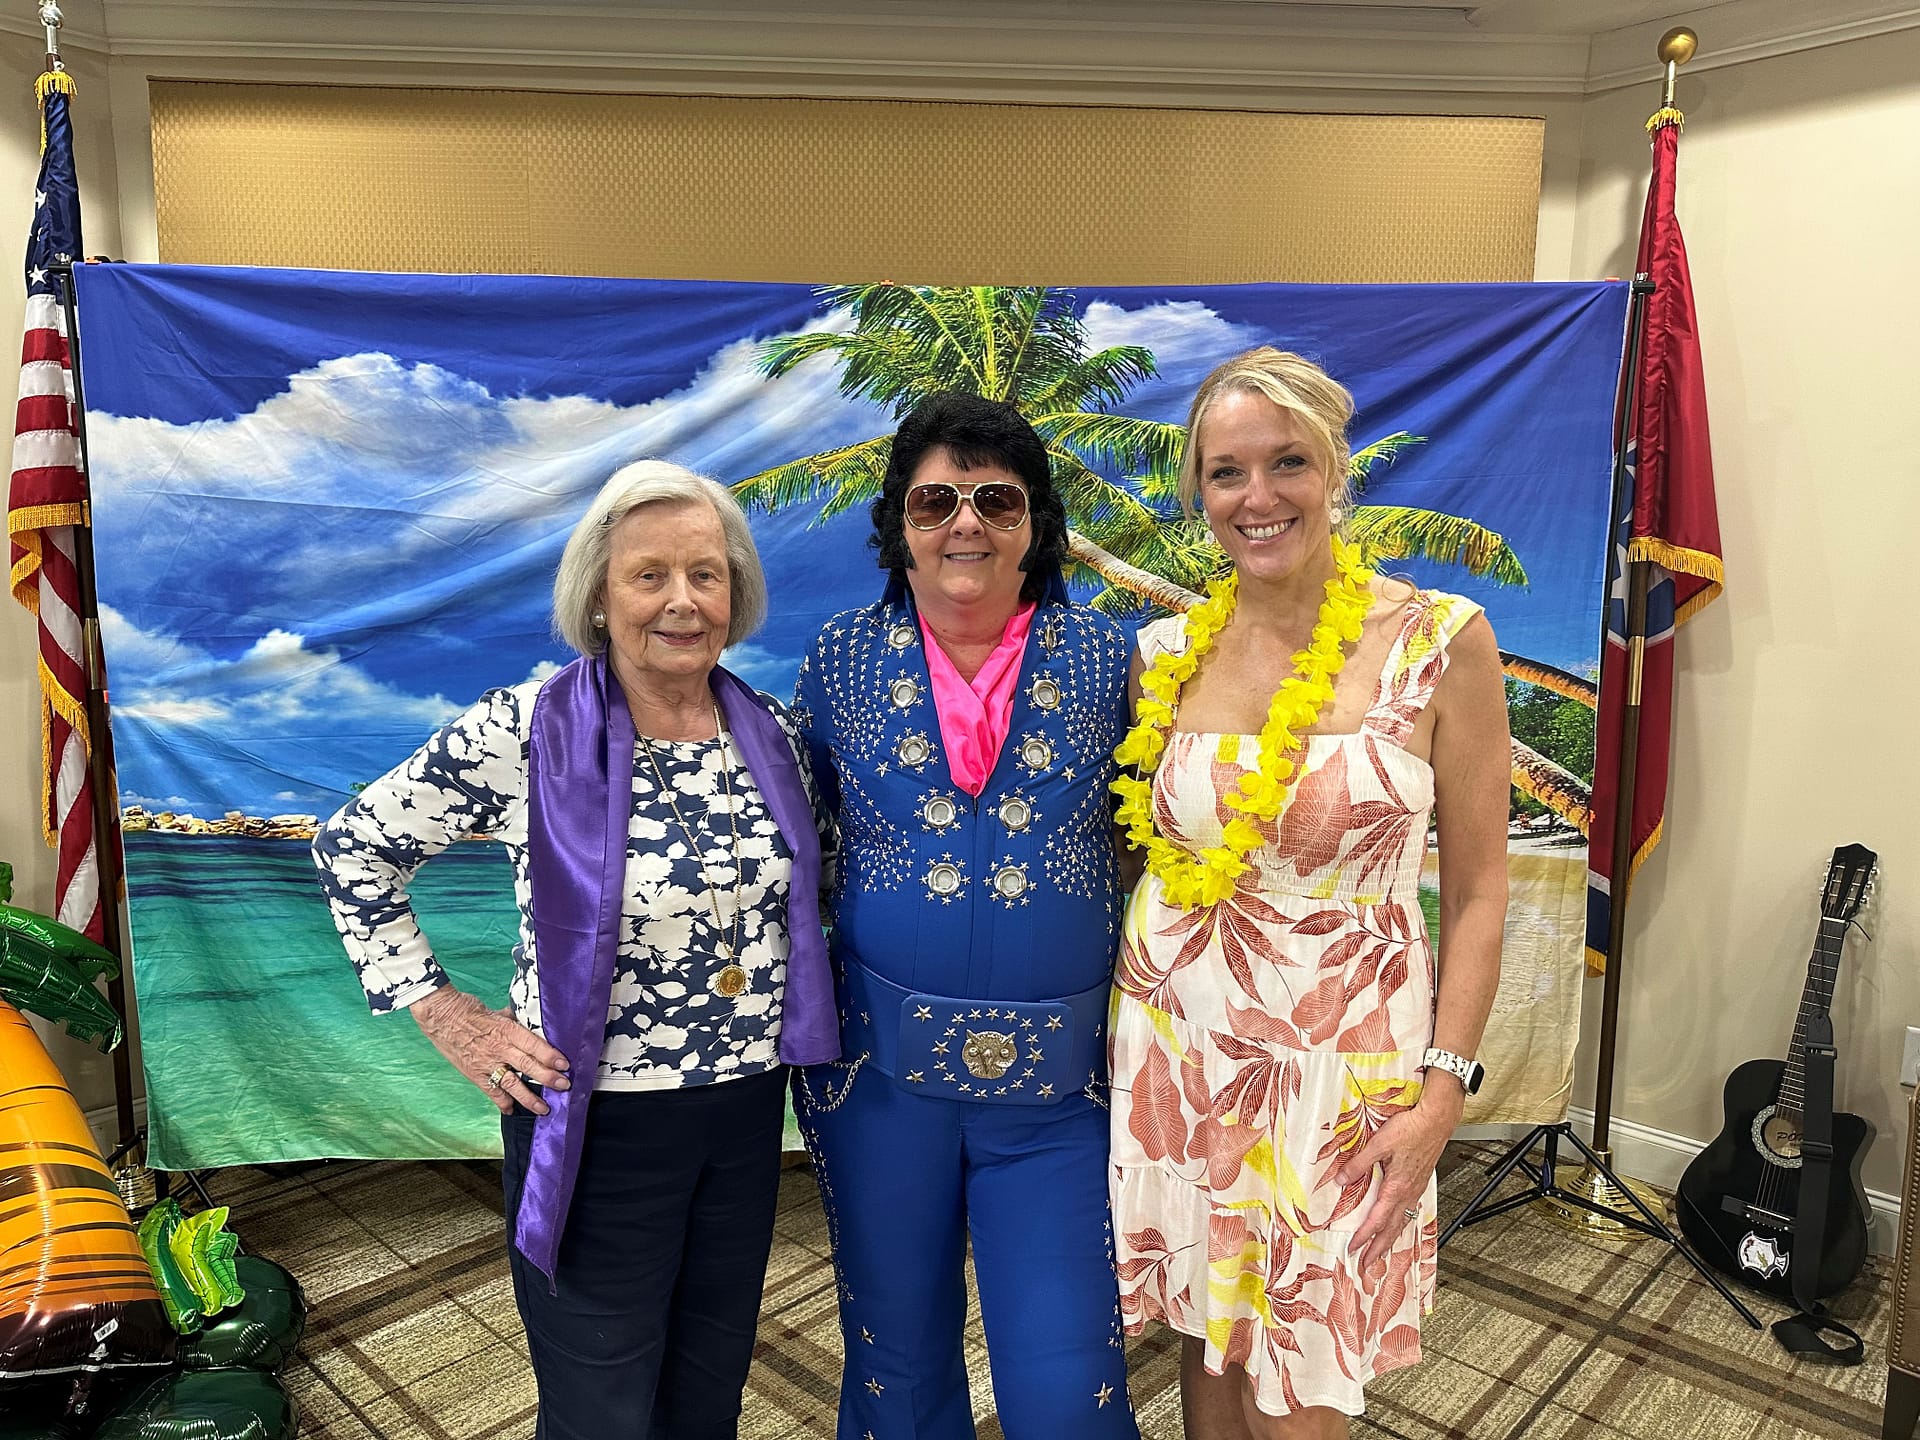 Gerda with an Elvis tribute artist and Samantha Parker, Community Relations Director at Morning Pointe of Hixson